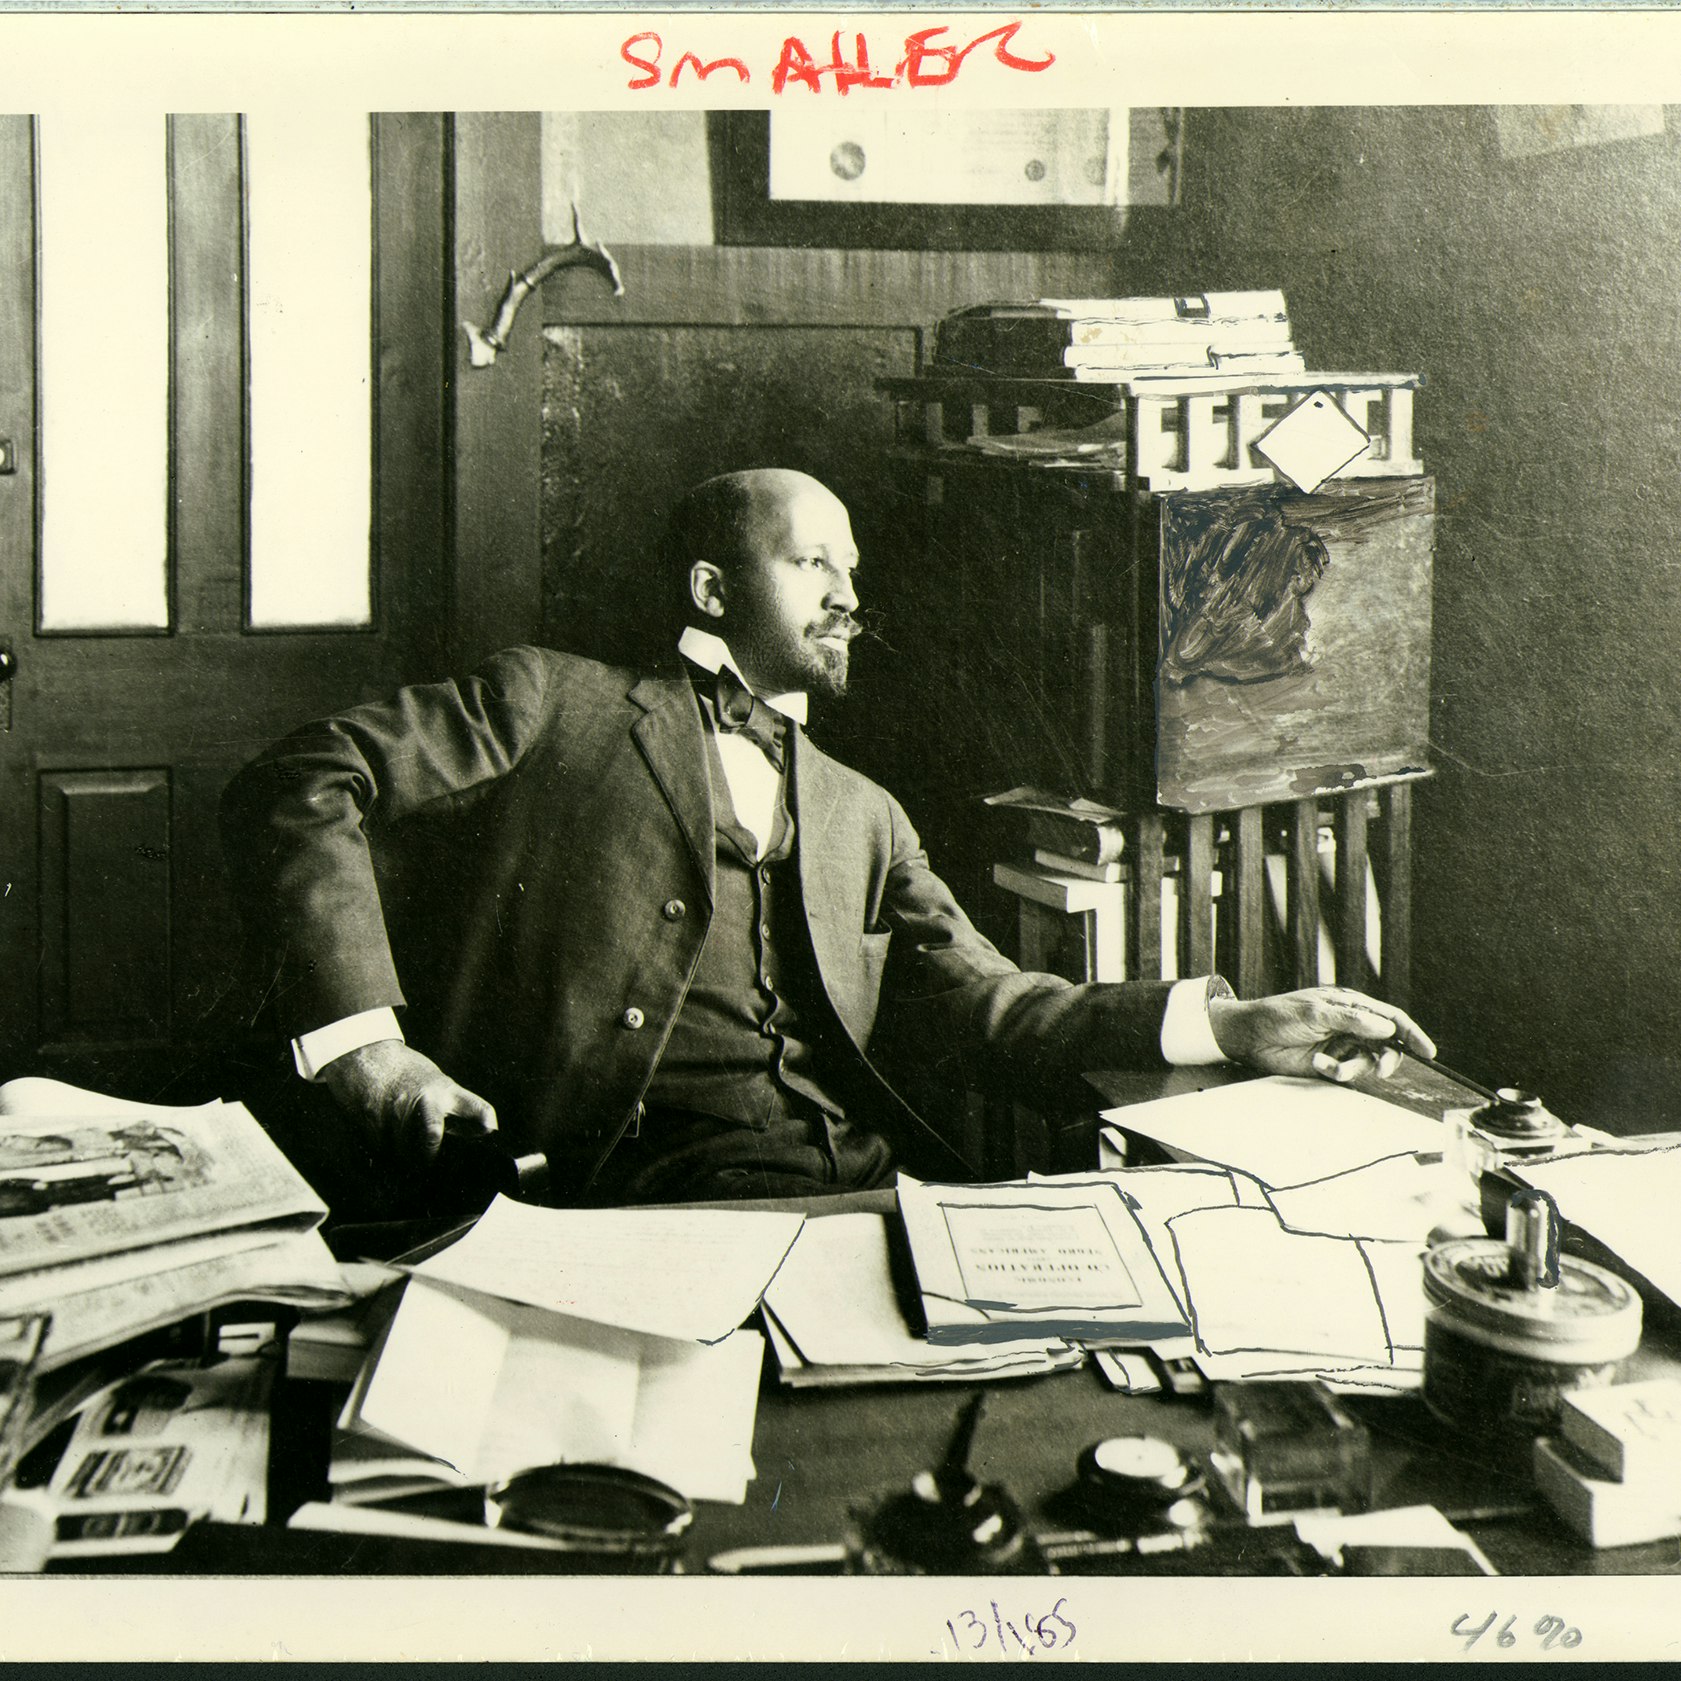 W. E. B. Du Bois seated at his desk in his office at Atlanta University. There are many papers on the desk and Du Bois is leaning back and looking off into the distance.